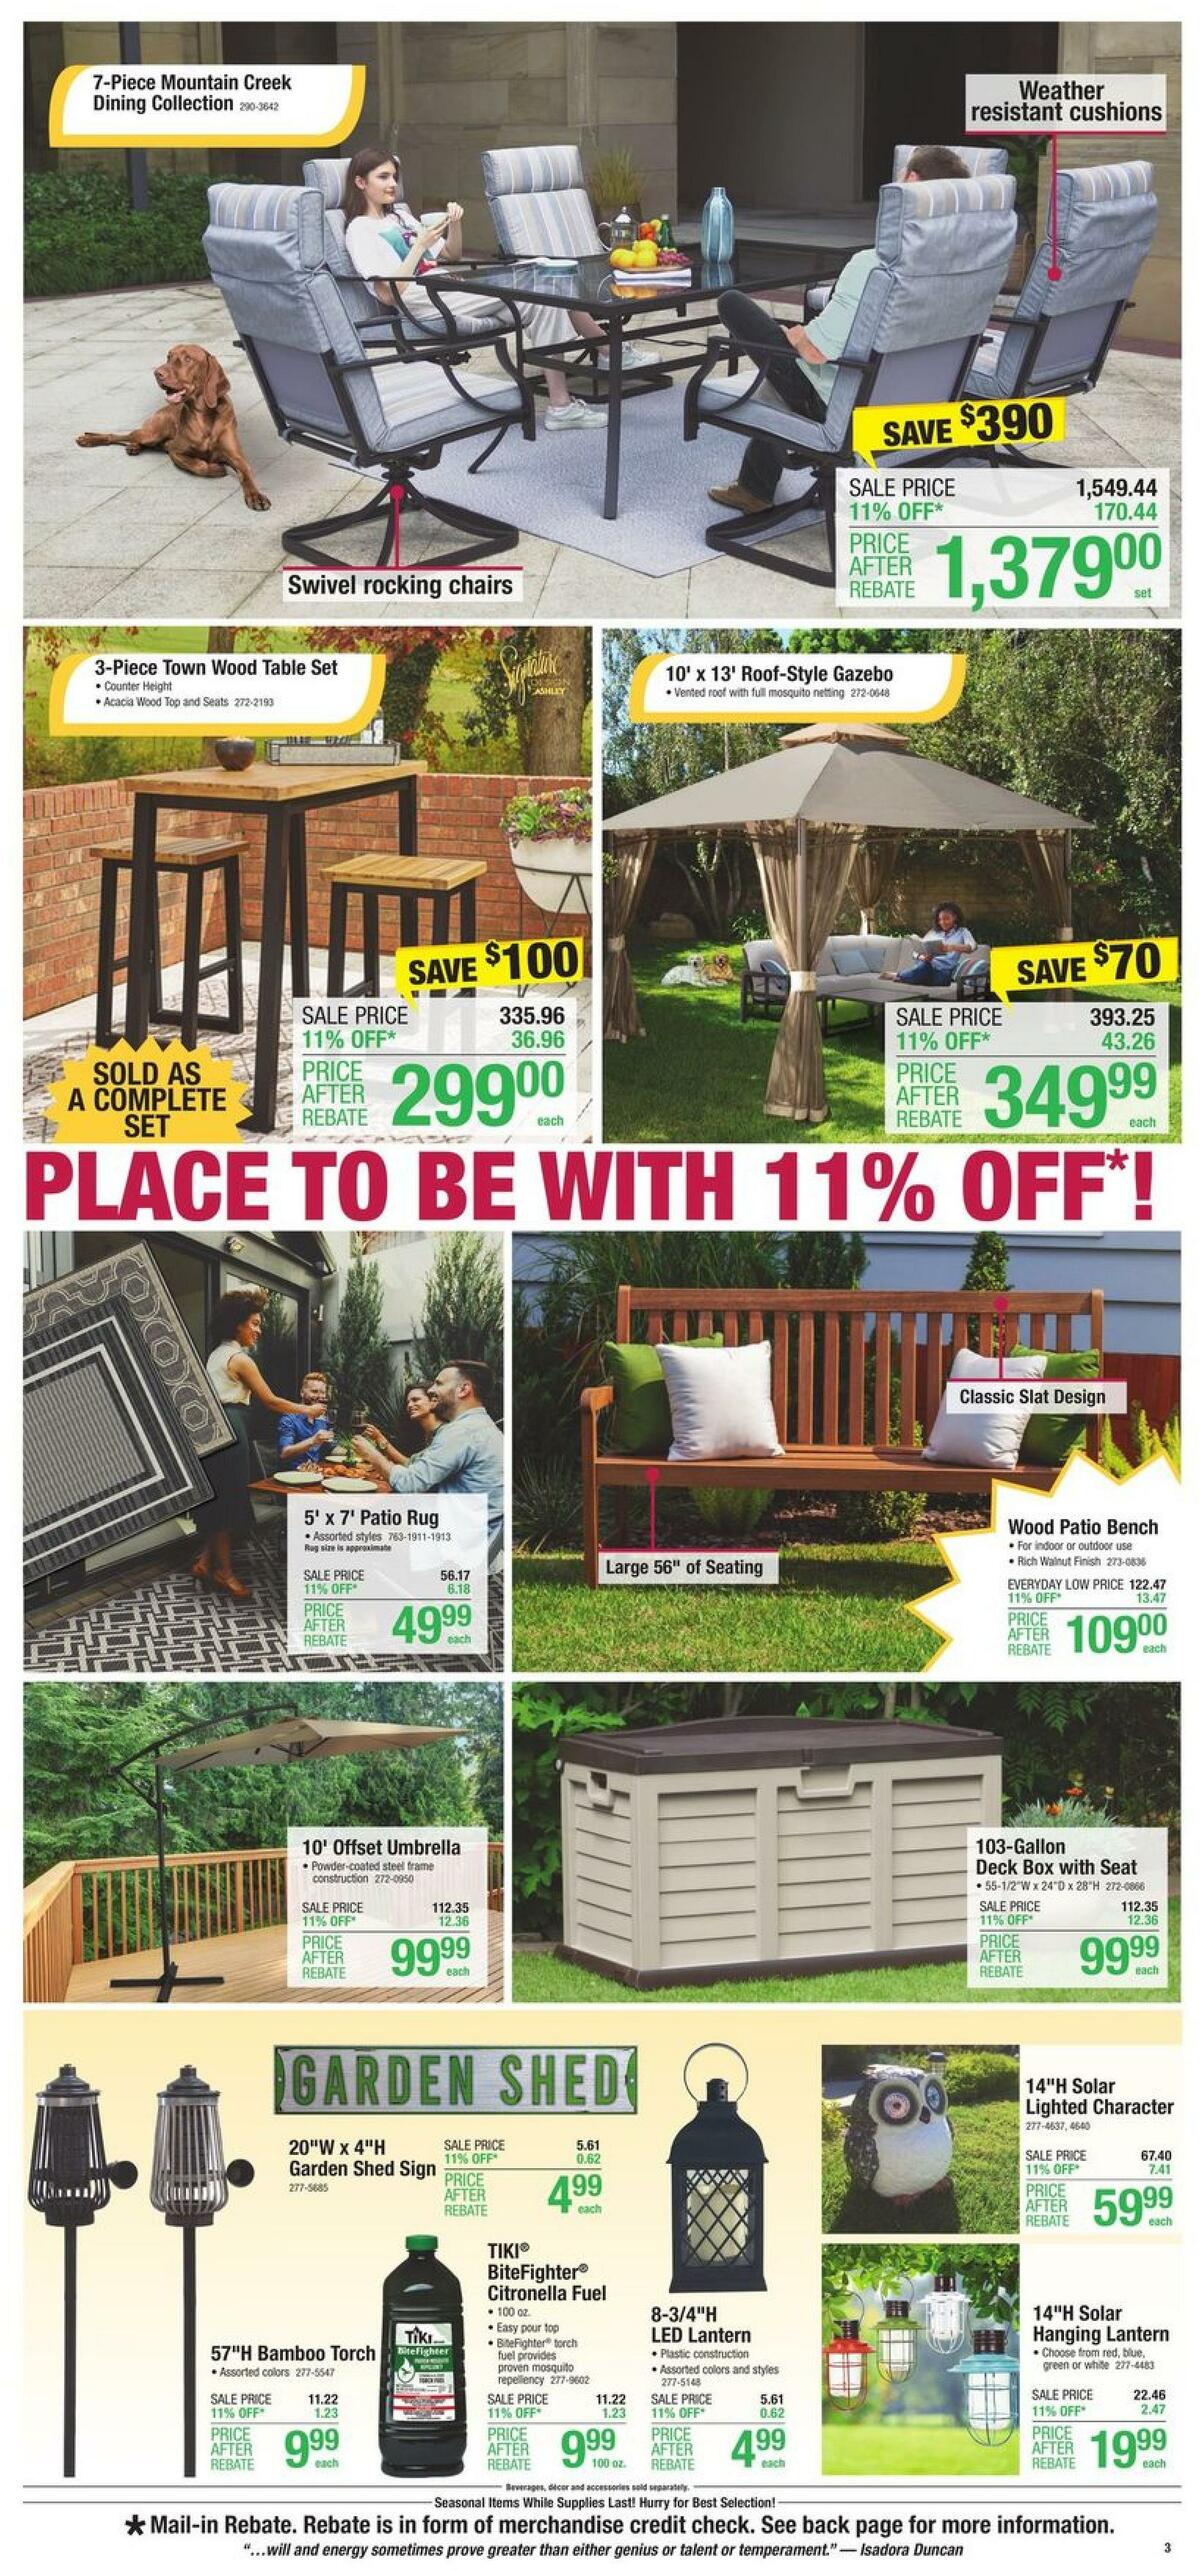 Menards Outdoor Living Weekly Ad from April 7